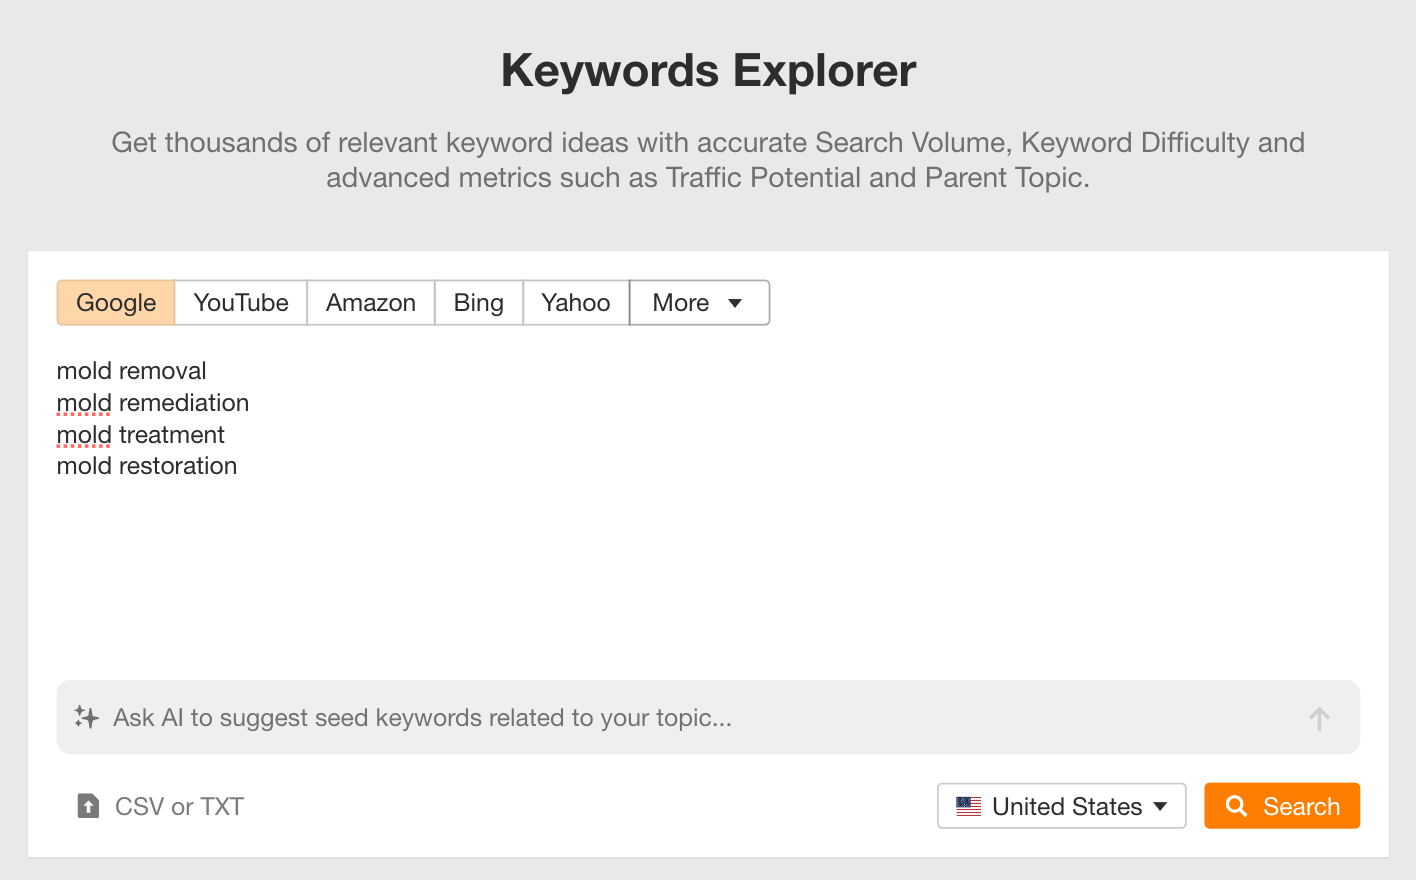 Using Ahrefs' Keyword Explorer to scale franchise SEO keyword research nationally.